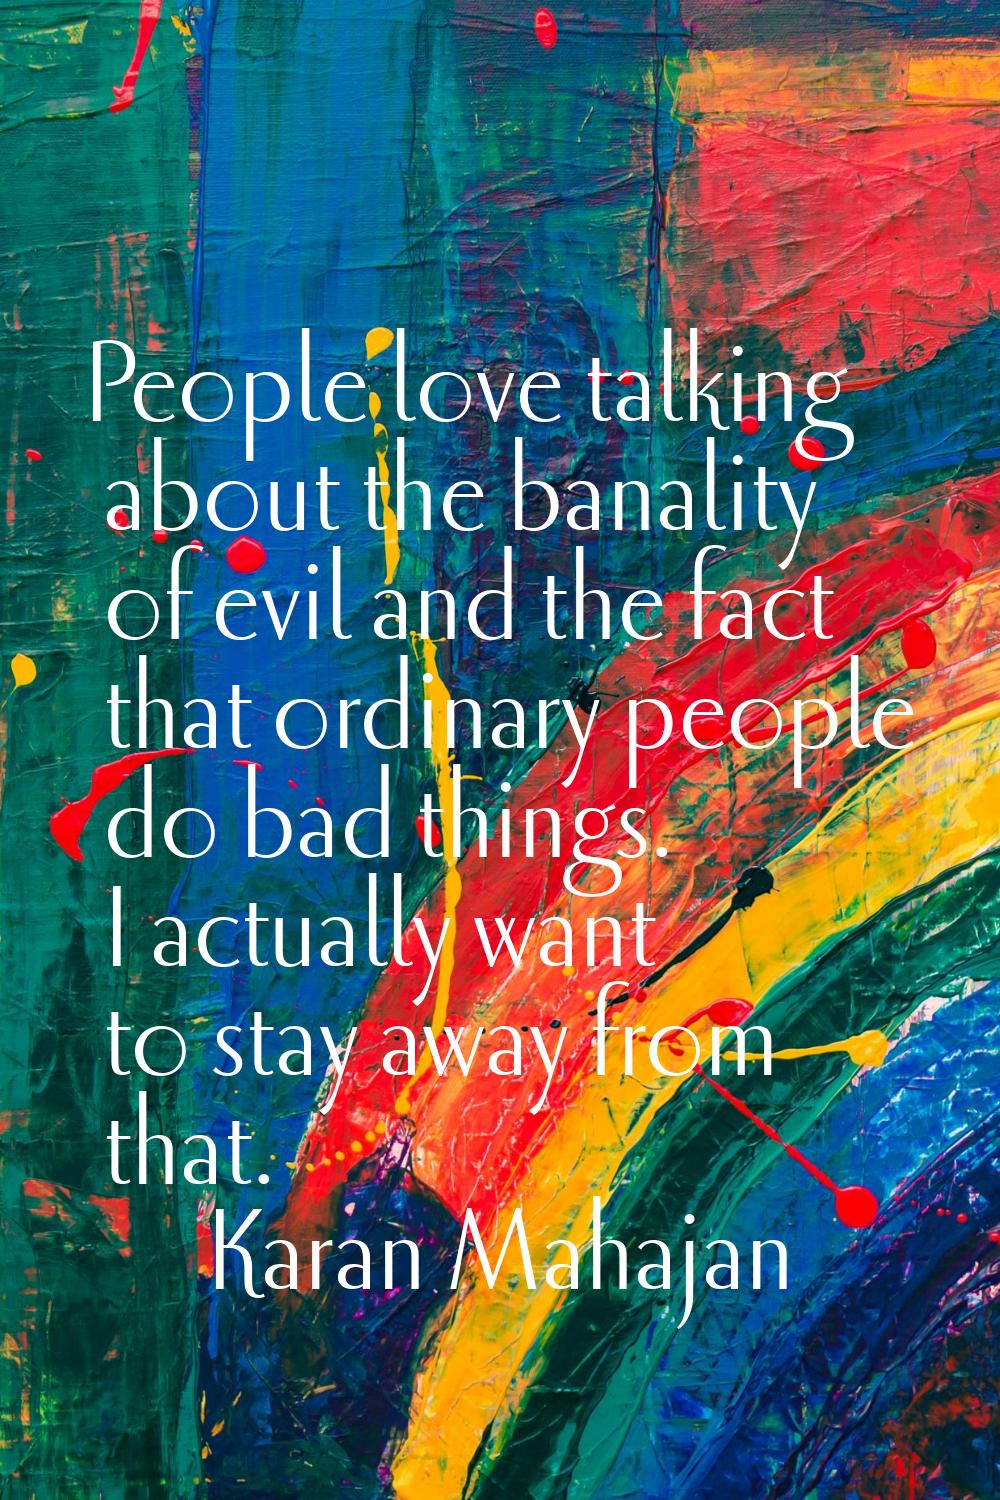 People love talking about the banality of evil and the fact that ordinary people do bad things. I a